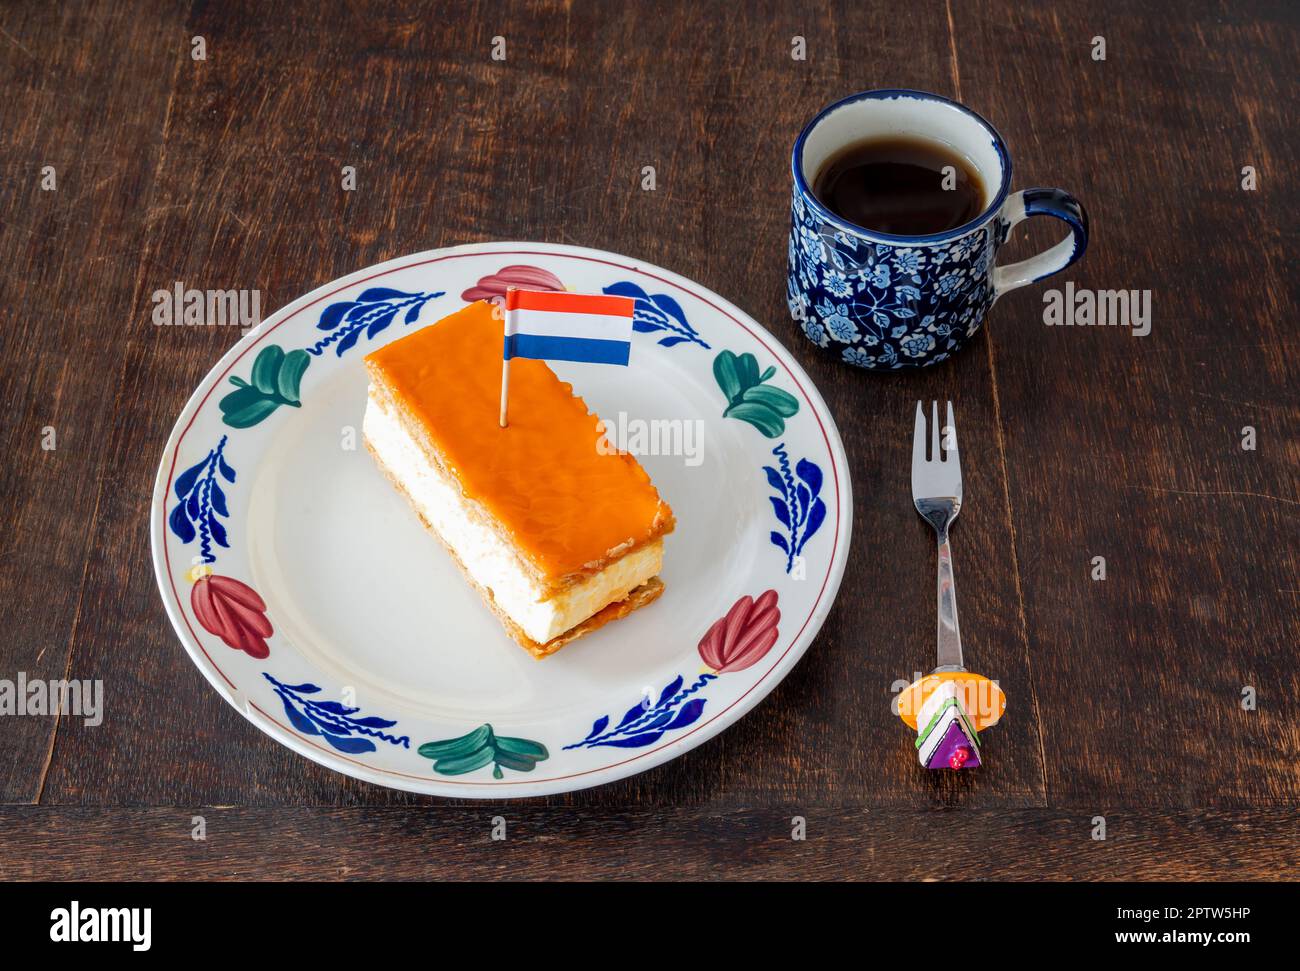 Traditional dutch pastry called Tompouce with orange top layer and dutch flag, which is typically eaten during King's Day celebrations Stock Photo